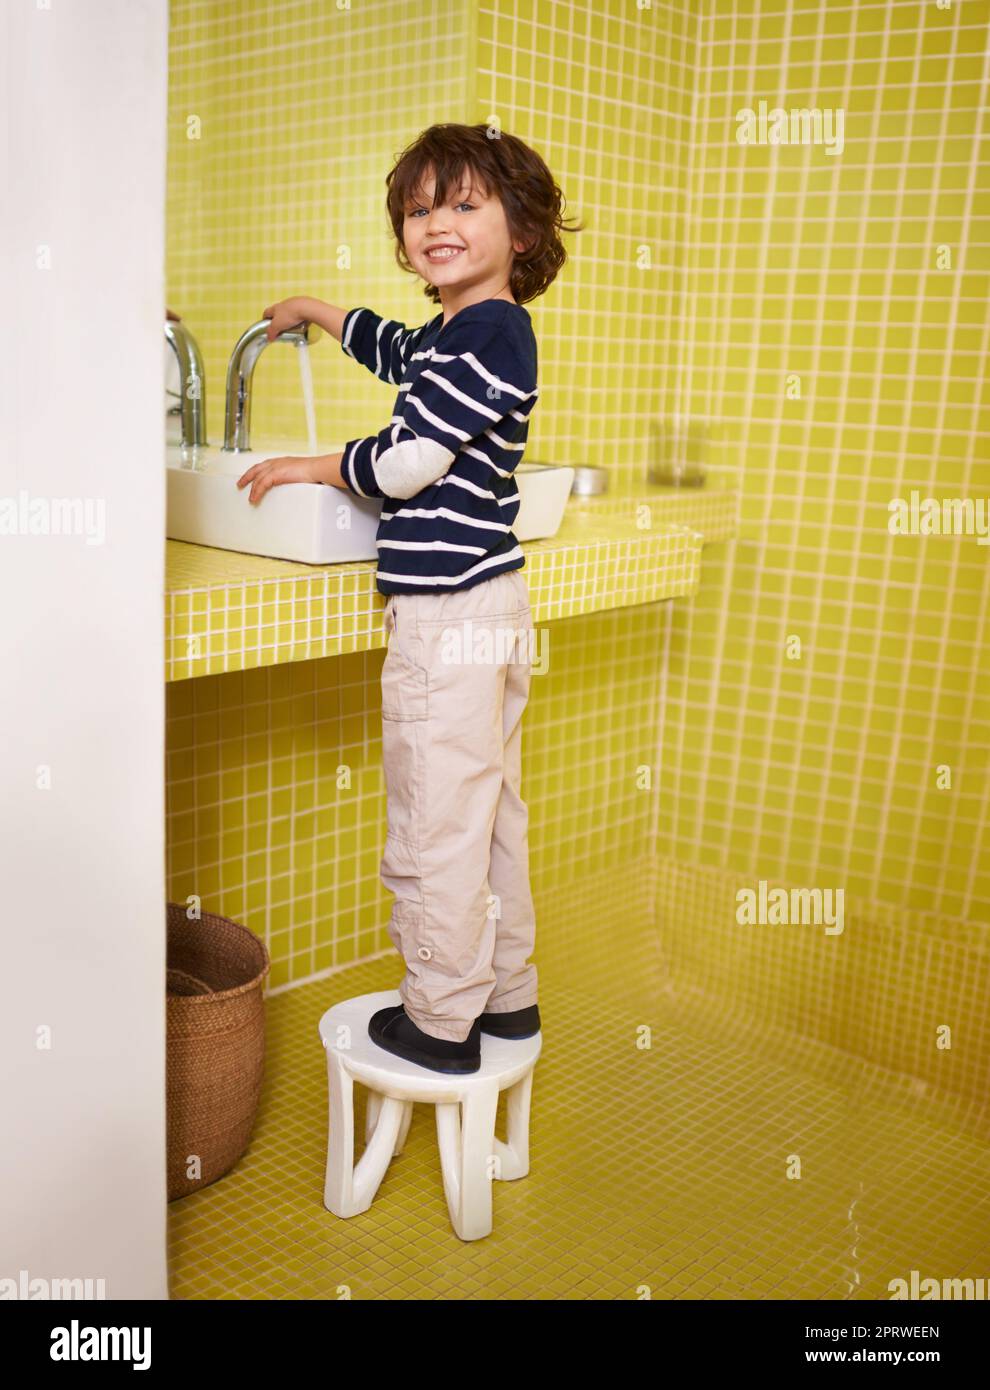 All clean. A cute little boy washing his hands in the bathroom basin. Stock Photo